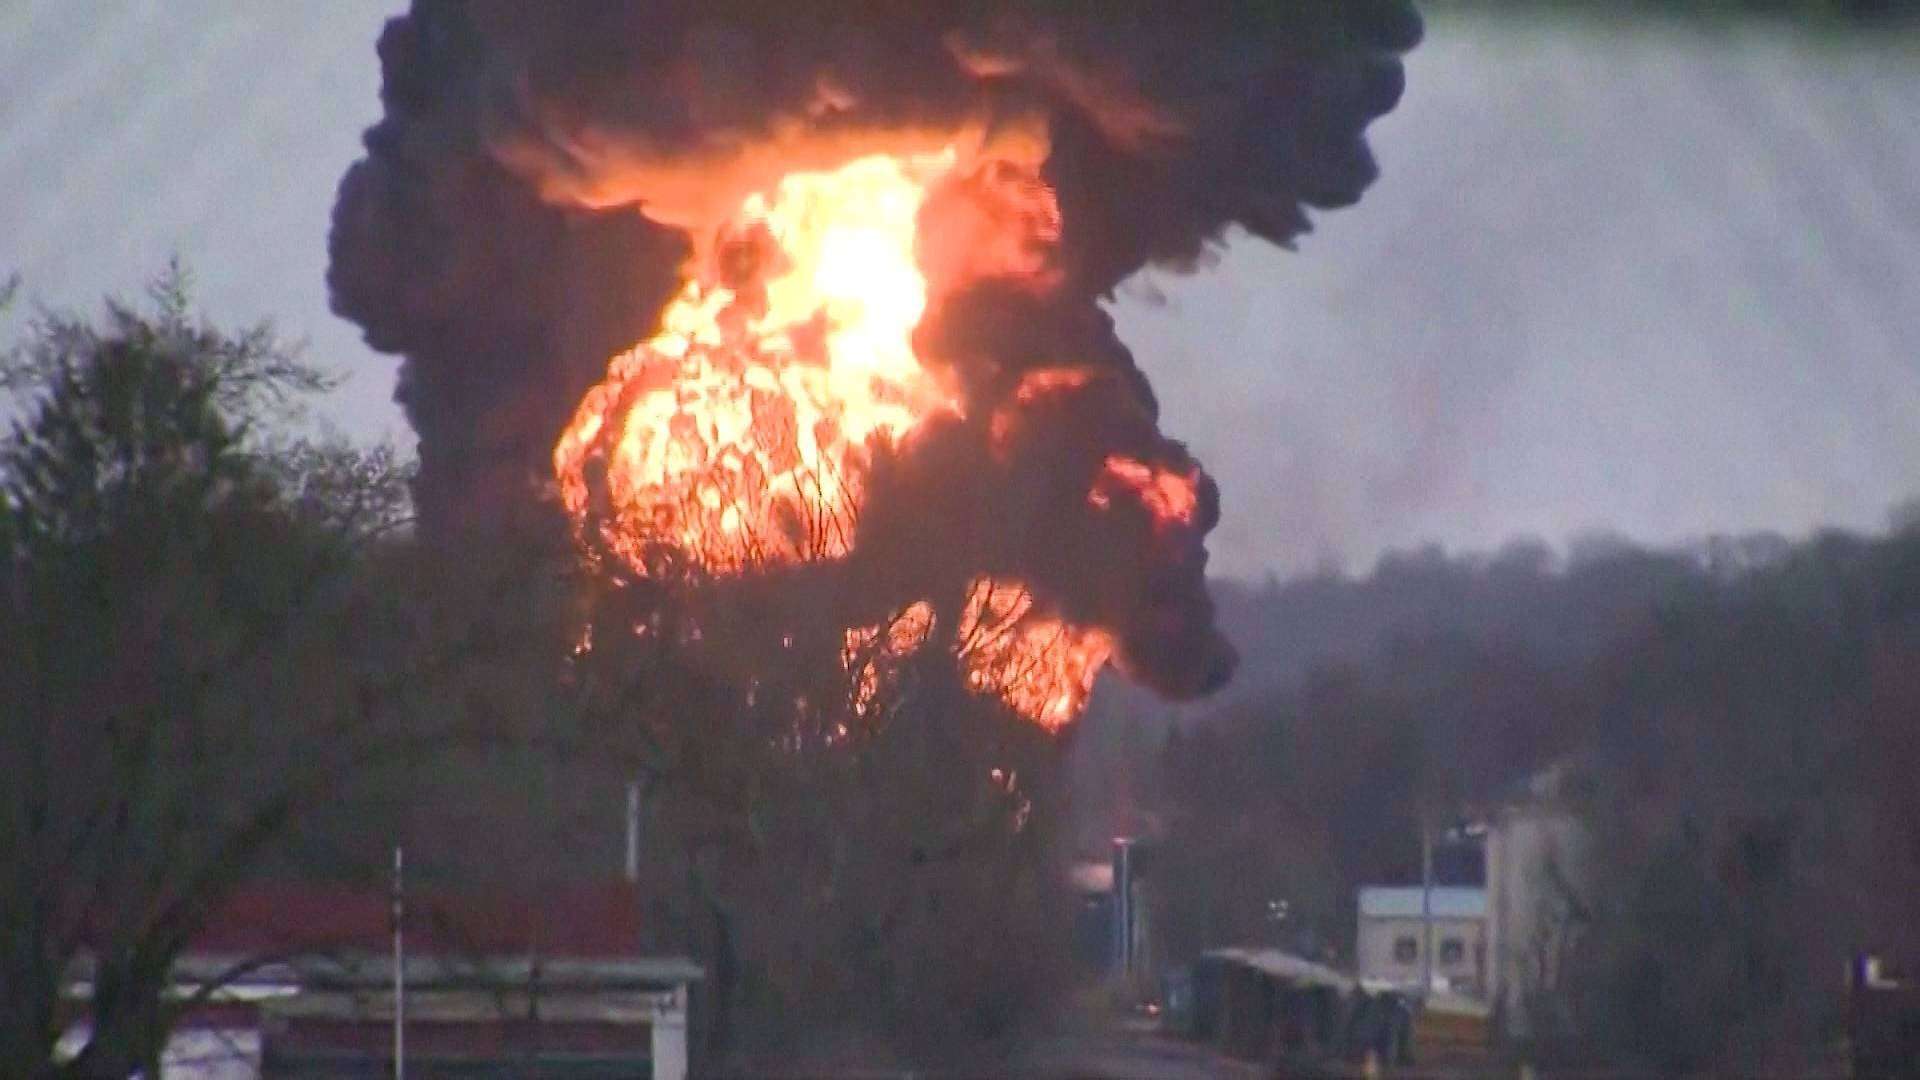 image for “Bomb Train” in Ohio Sickens Residents After Railroad Cutbacks, Corporate Greed Led to Toxic Disaster